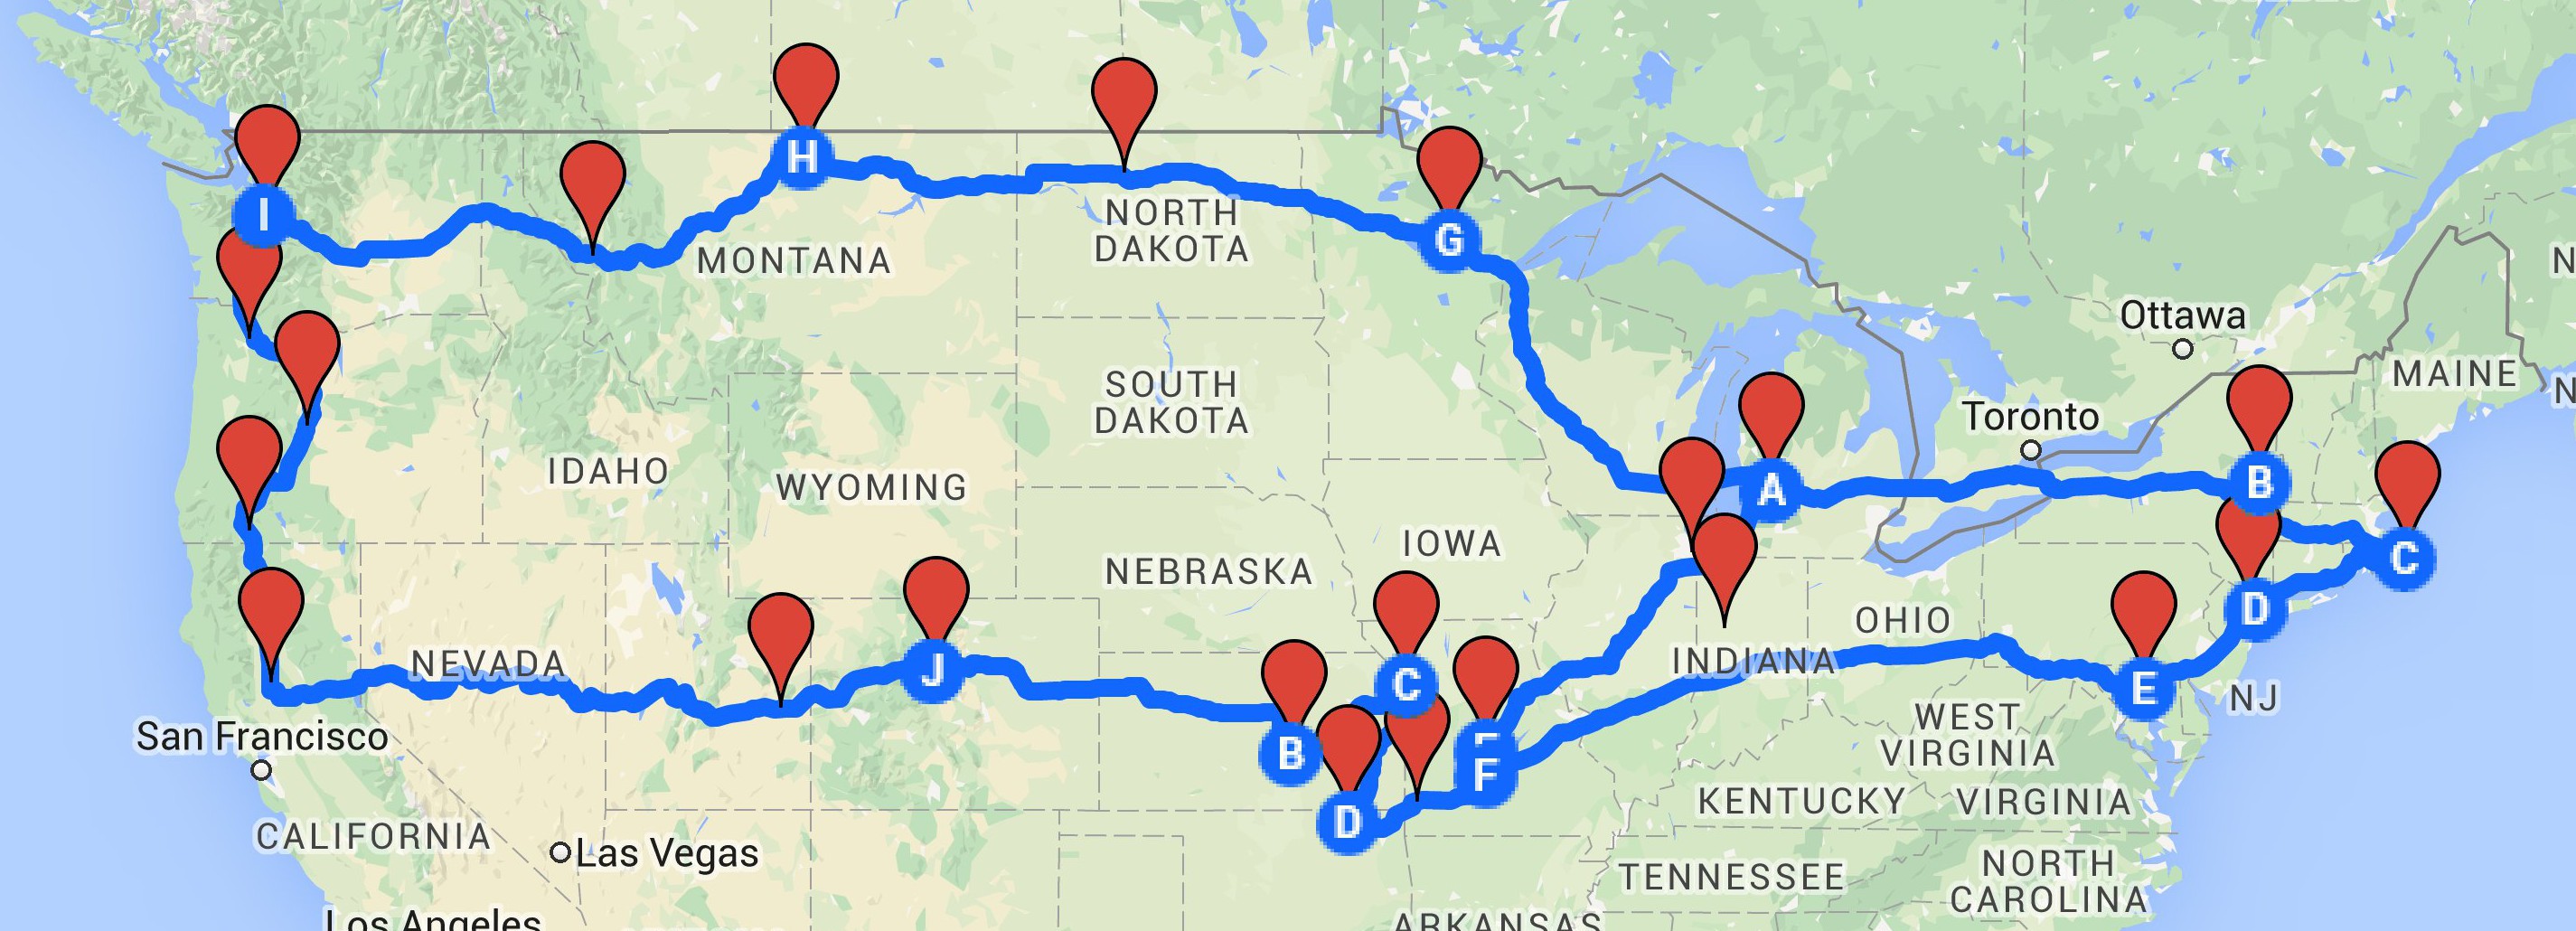 Proposed tour of US- August-September 2015